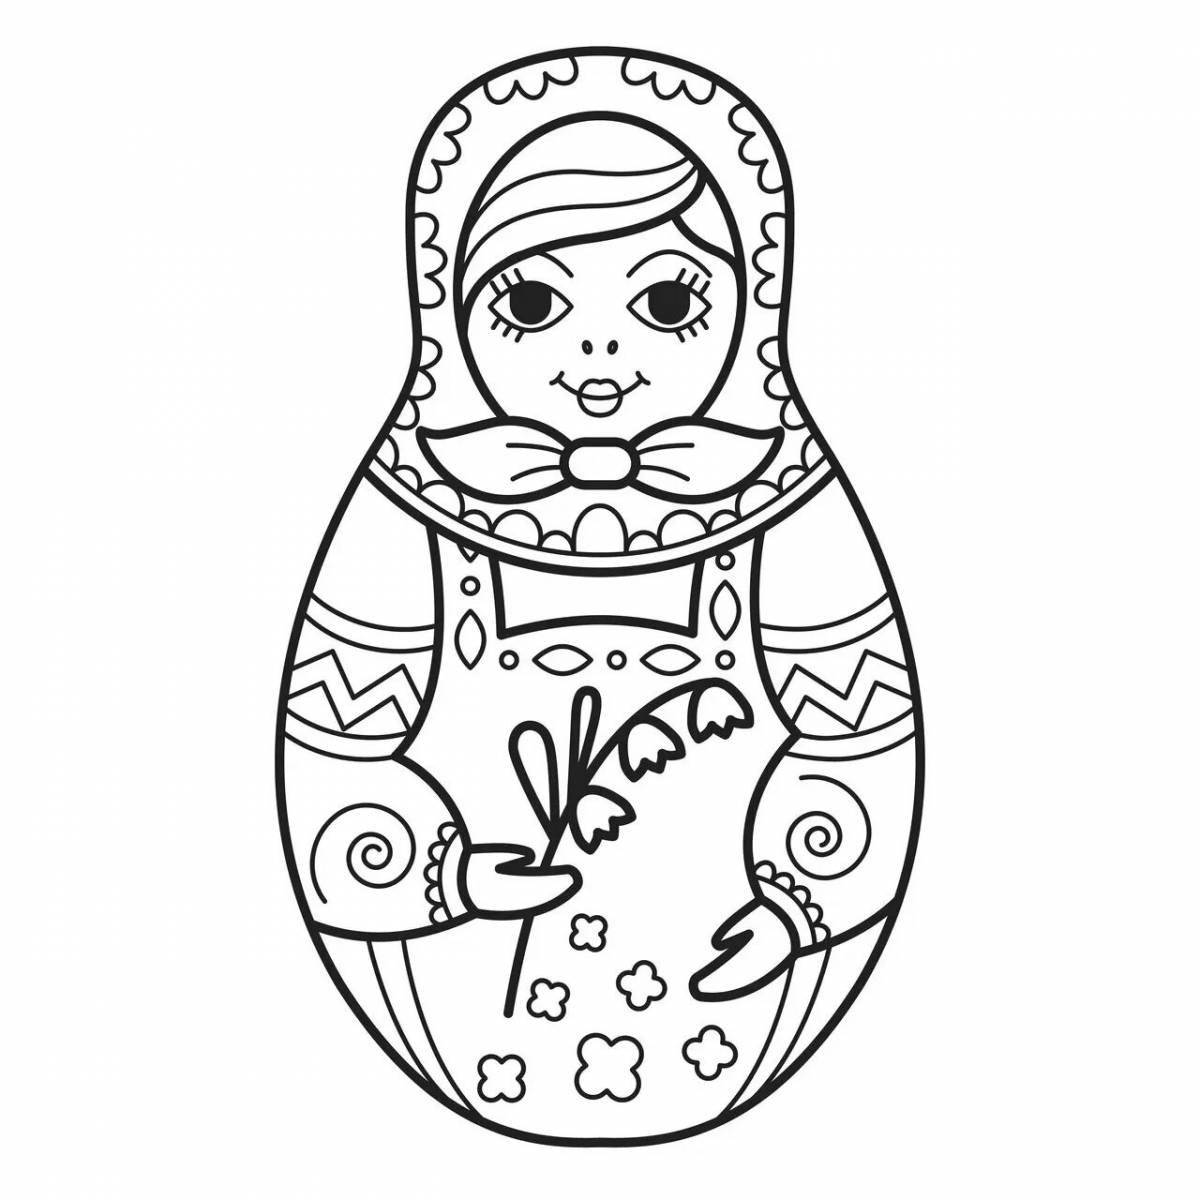 Coloring page charming Russian folk toy